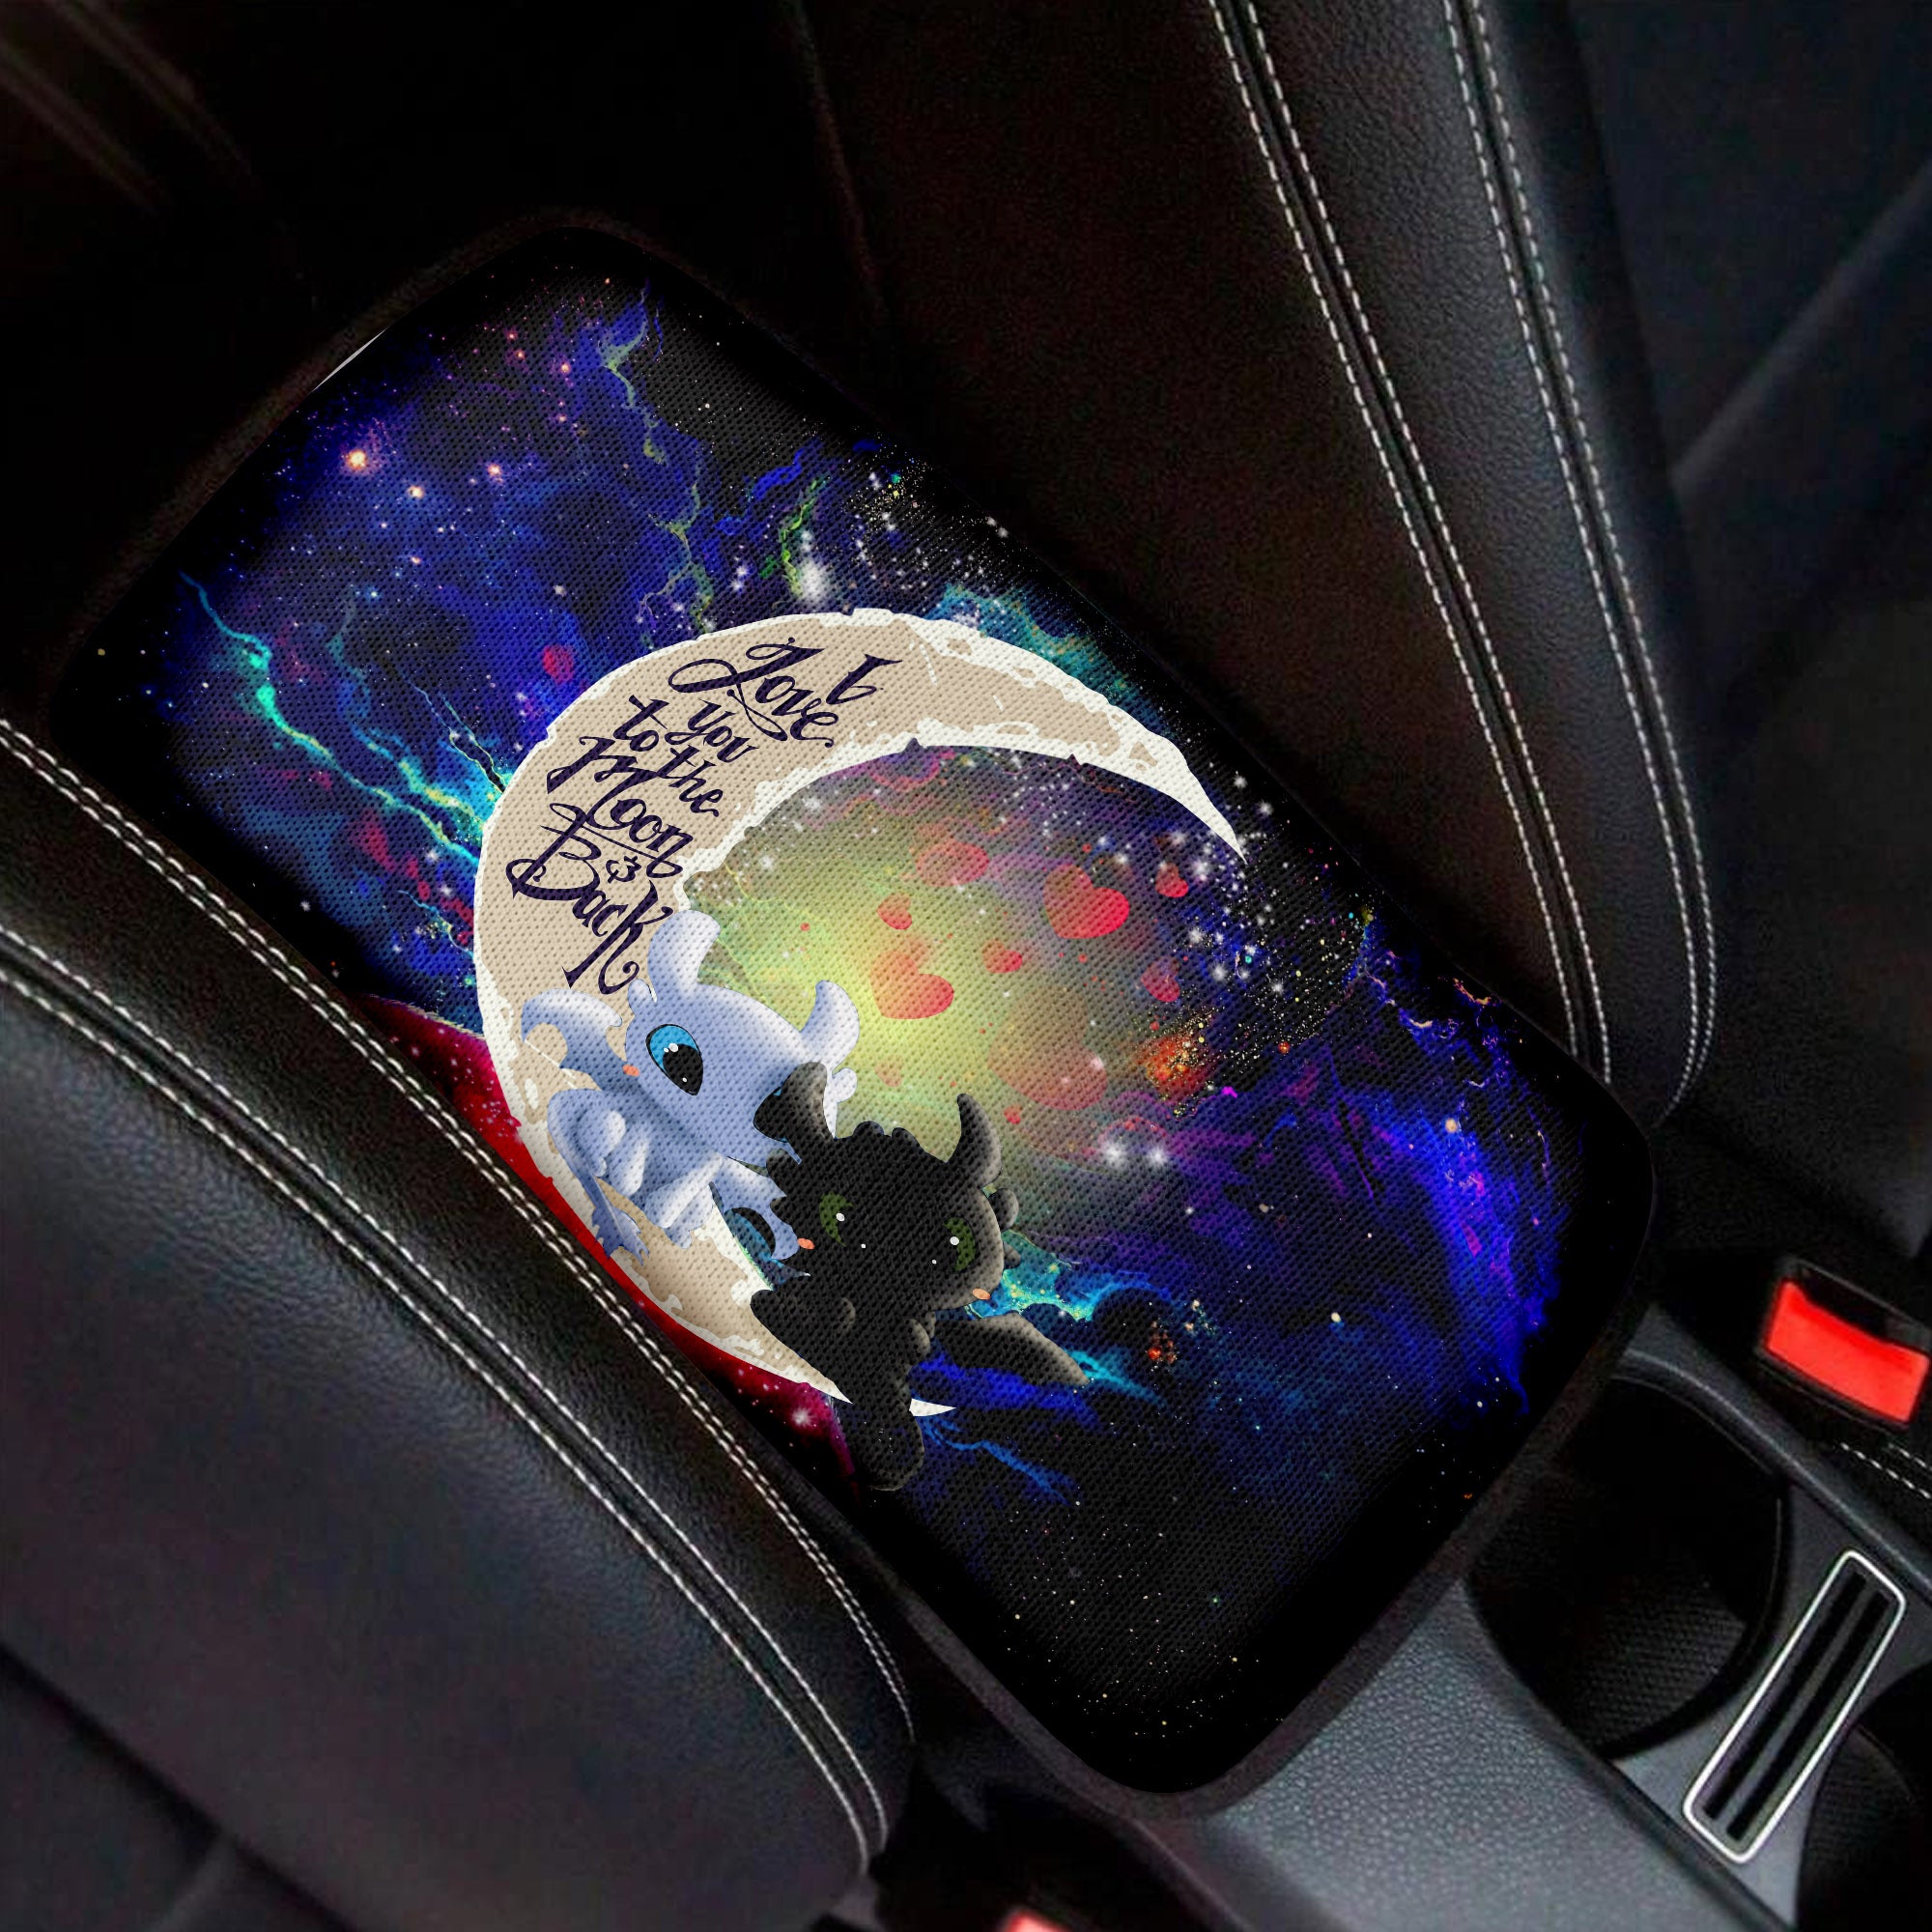 Toothless Light Fury Night Fury Love To Moon Back Galaxy Premium Custom Armrest Center Console Cover Car Accessories Nearkii